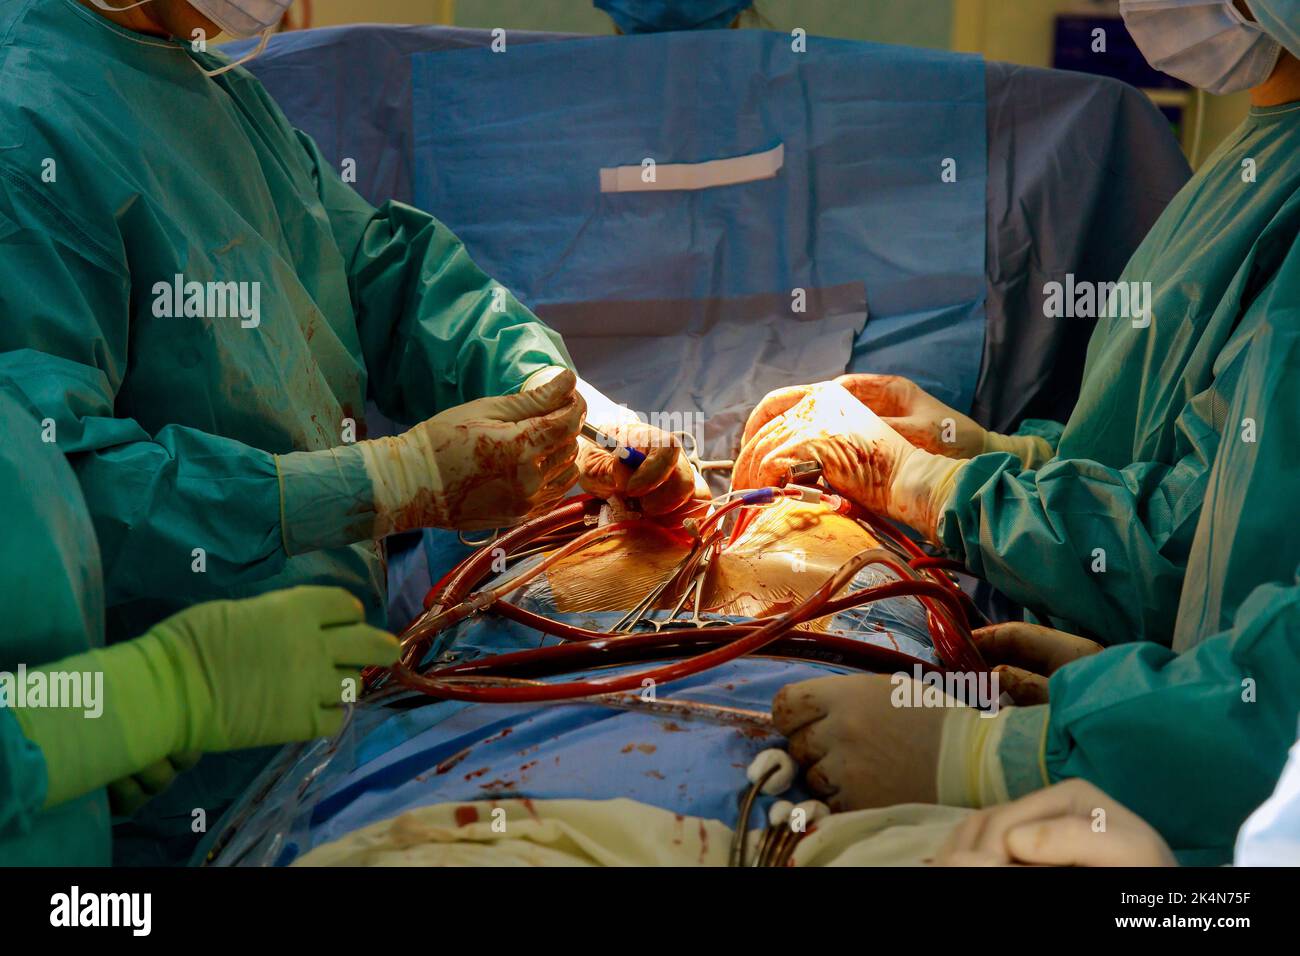 A coronary artery bypass graft CABG is performed in the hospital operating room for the treatment of heart diseases because of coronary heart disease. Stock Photo